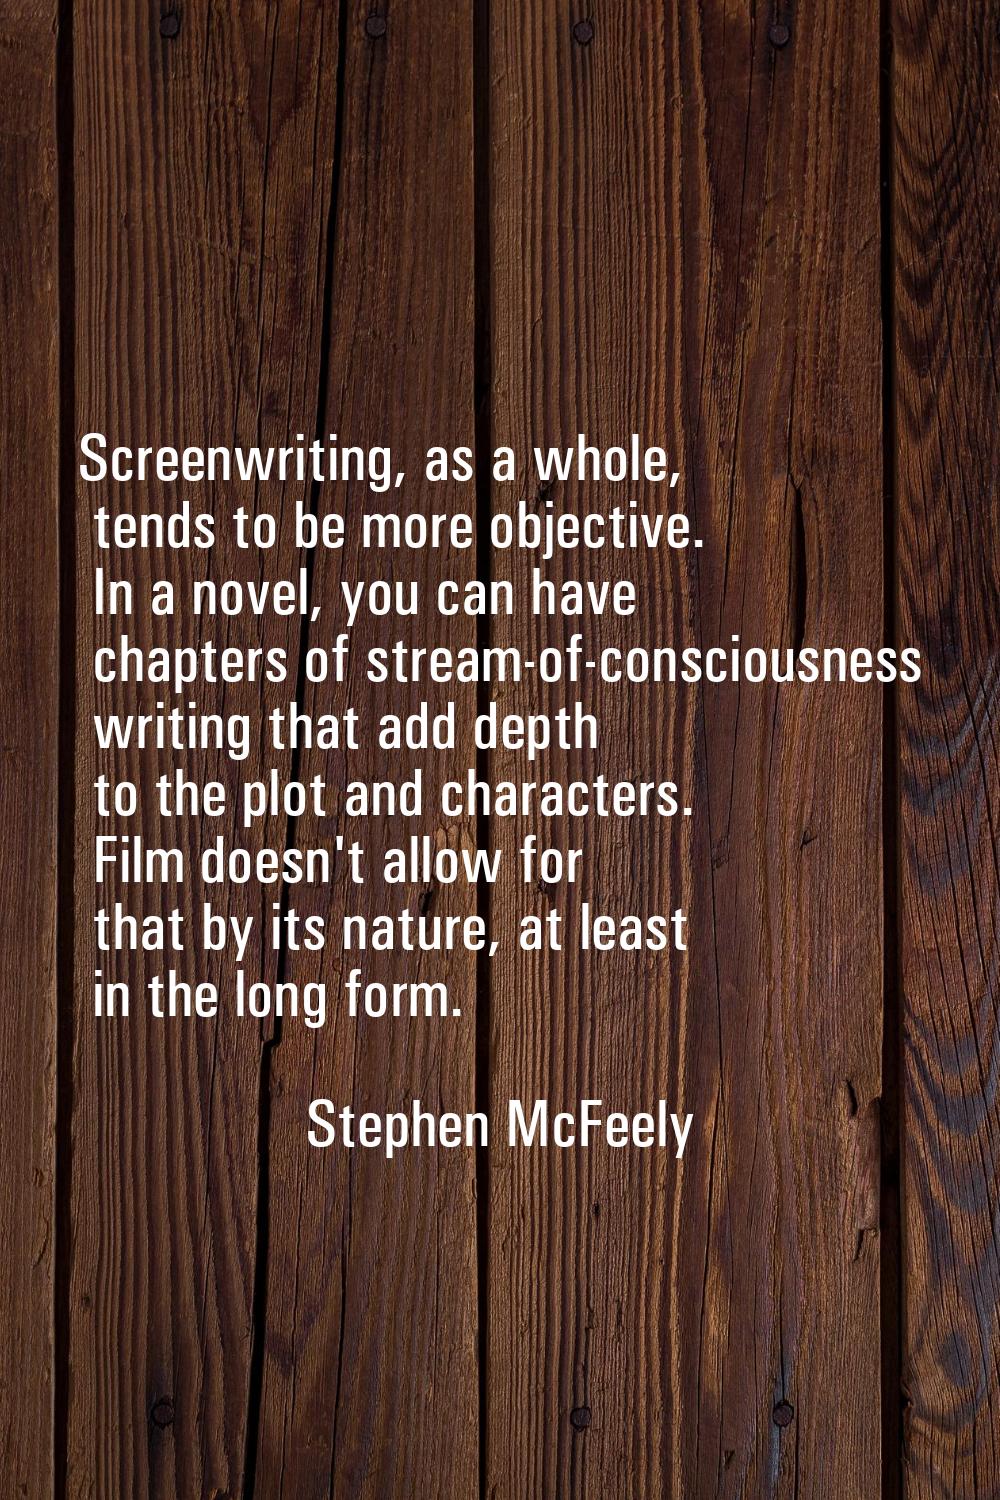 Screenwriting, as a whole, tends to be more objective. In a novel, you can have chapters of stream-